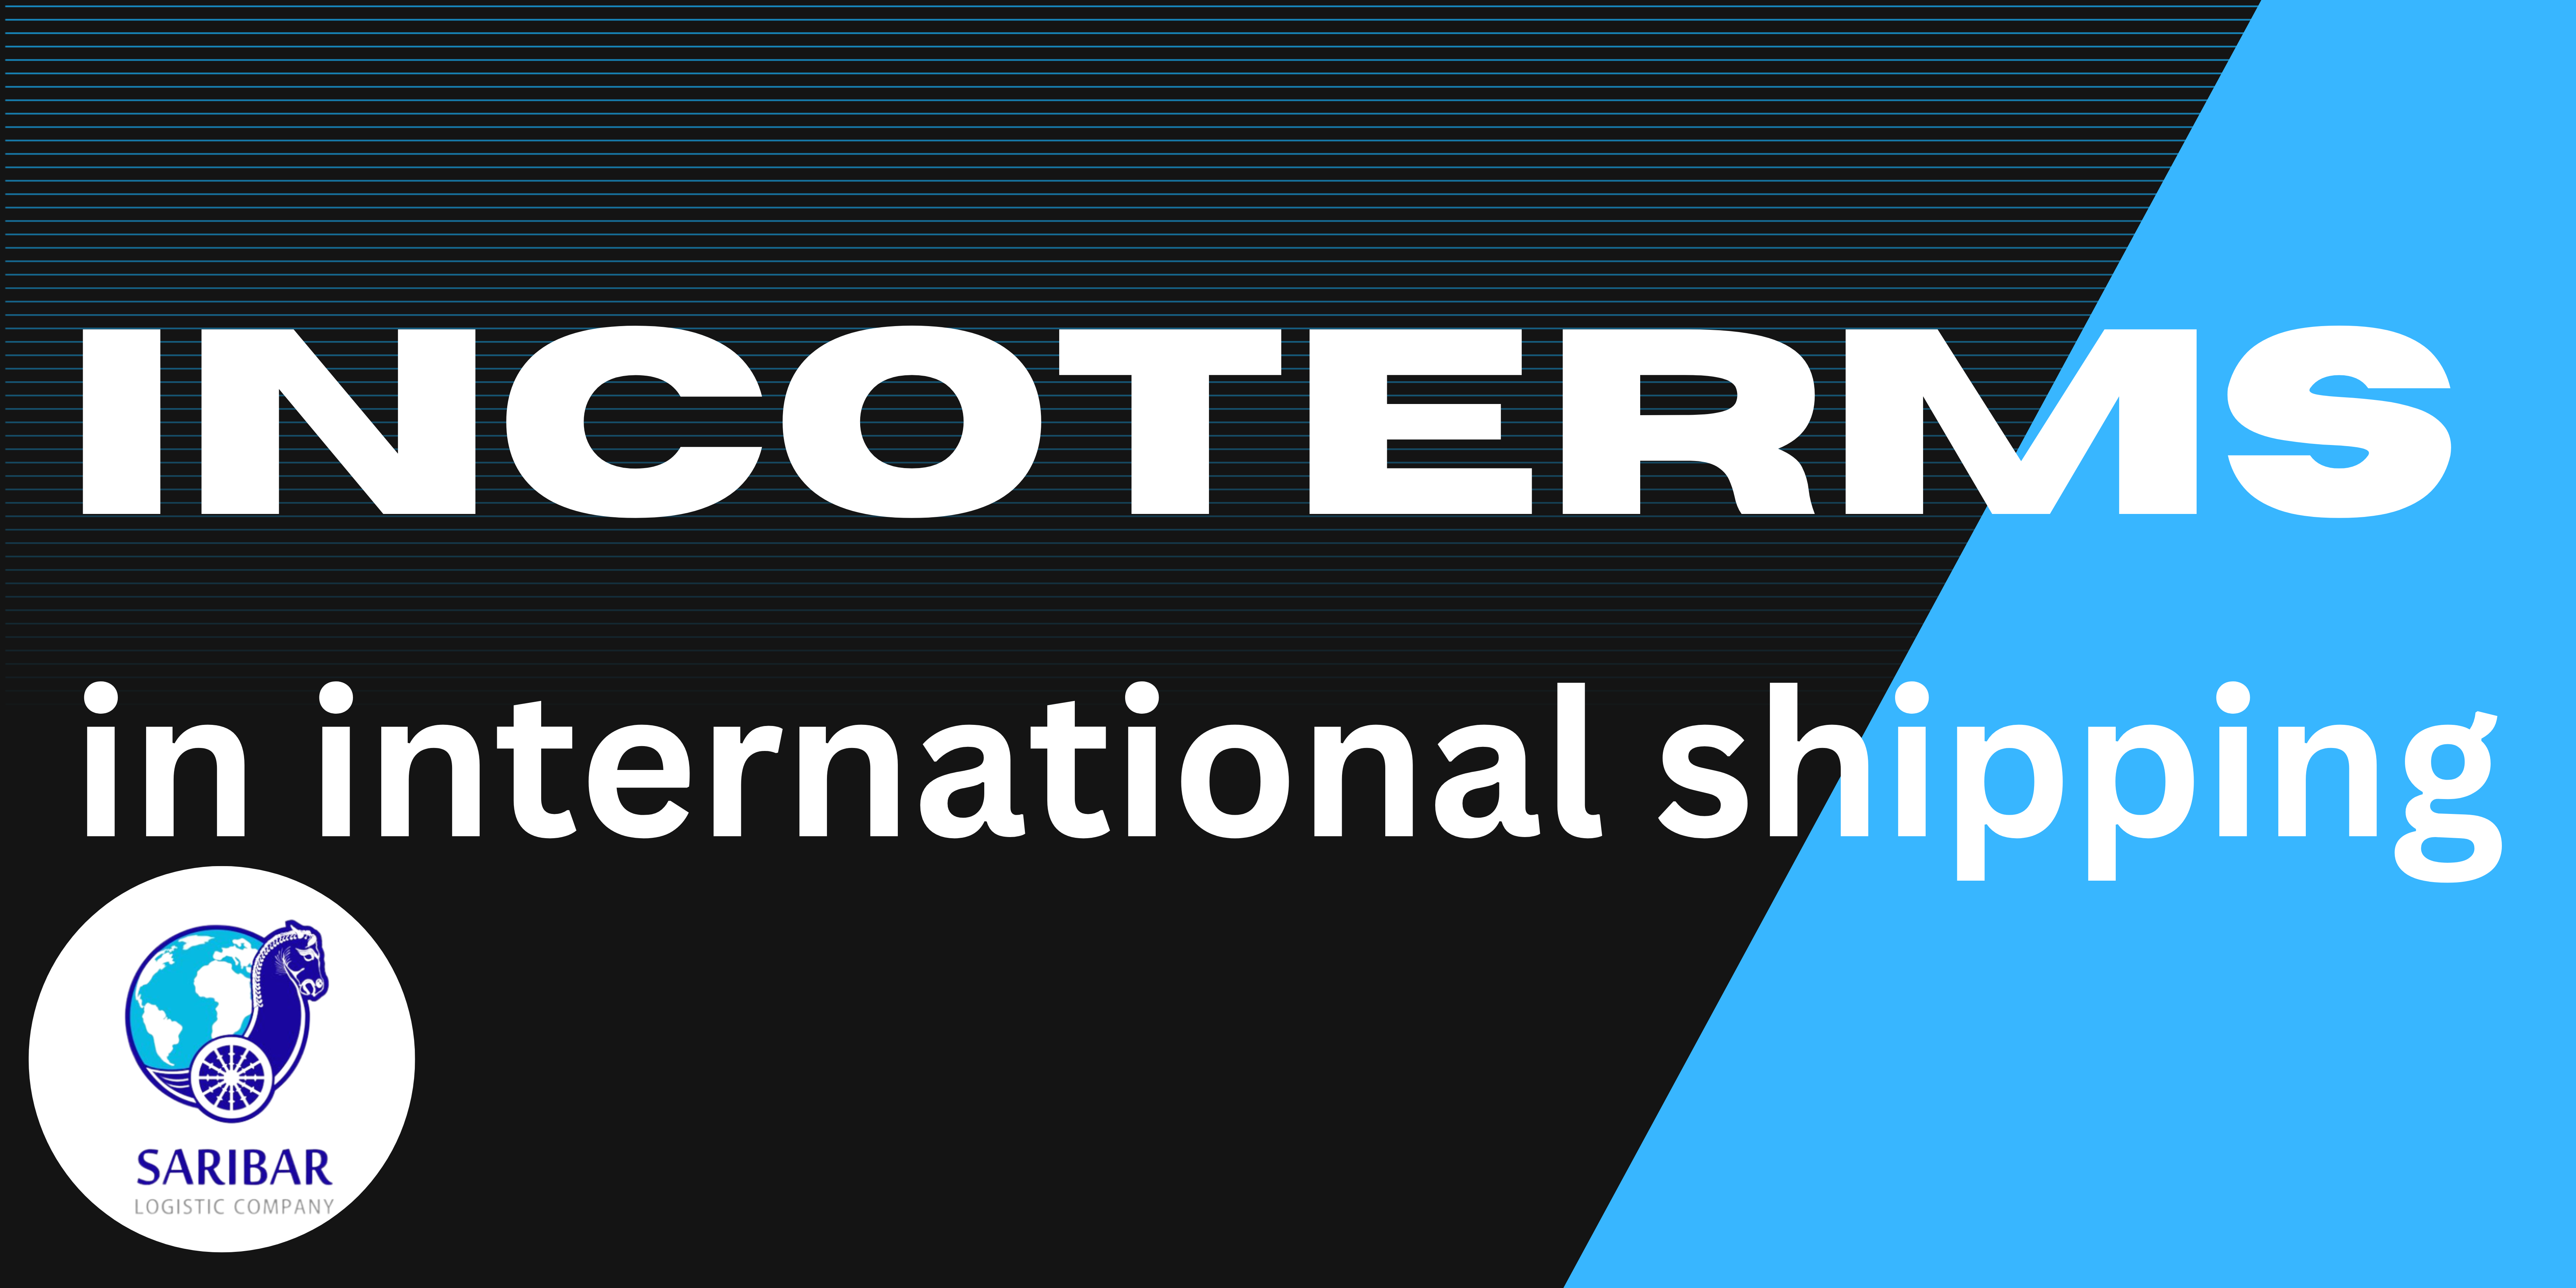 Incoterms In international shipping